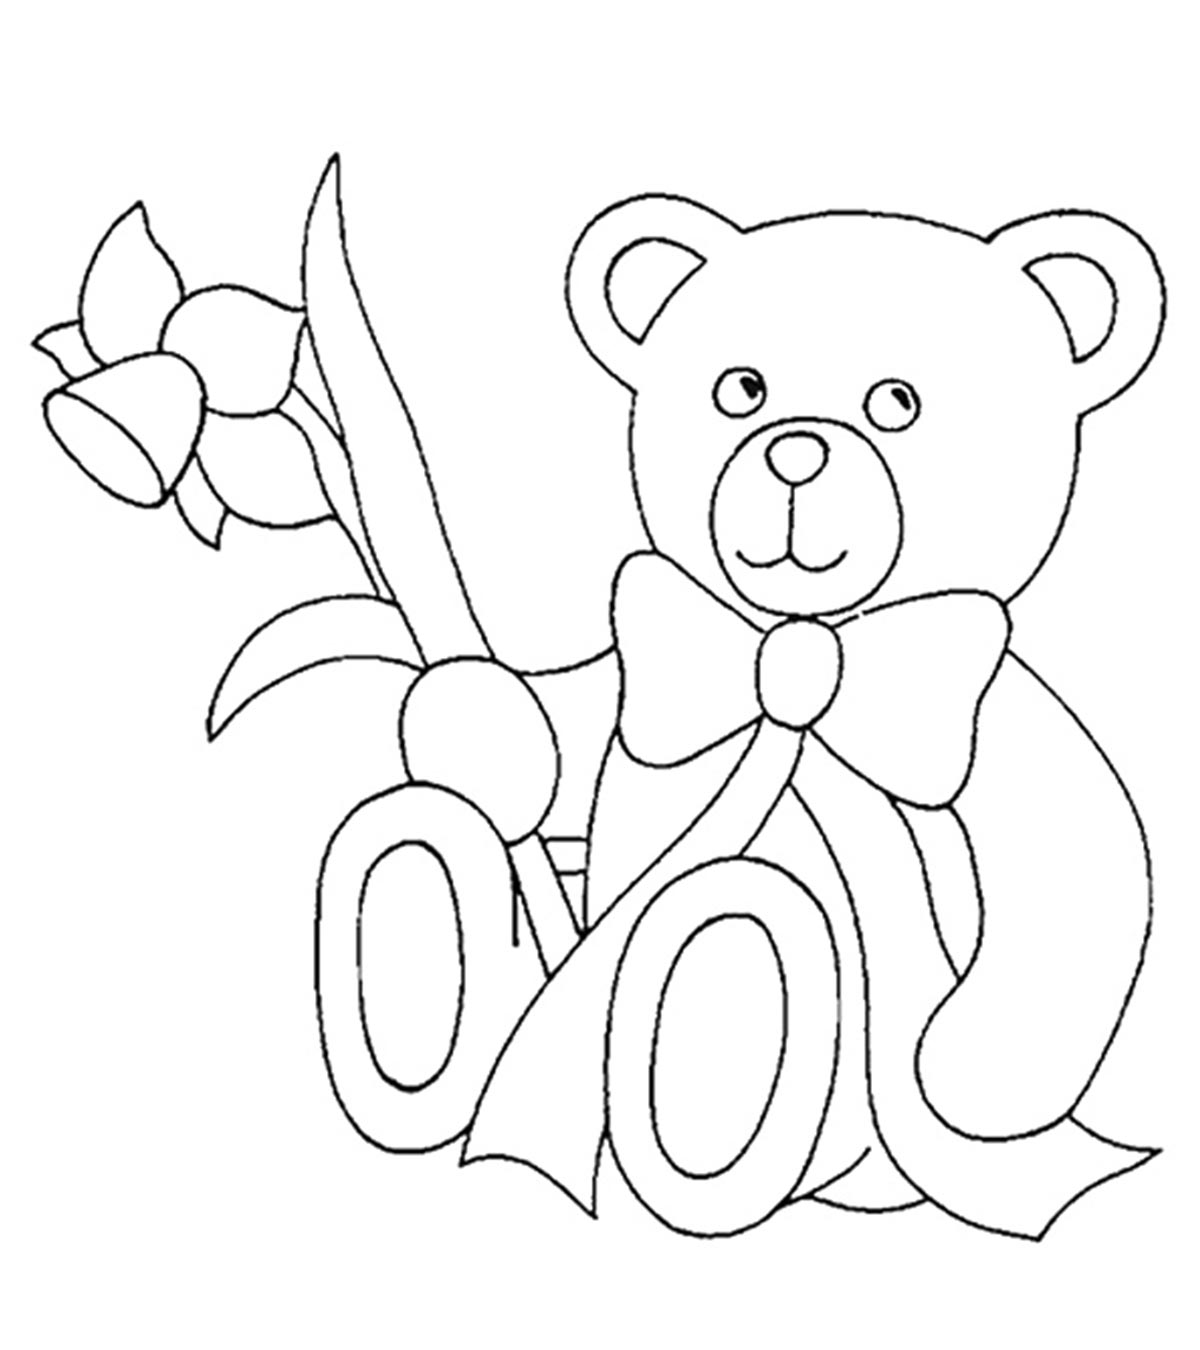 Top 18 Teddy Bear Coloring Pages Your Toddler Will Love To Color_image